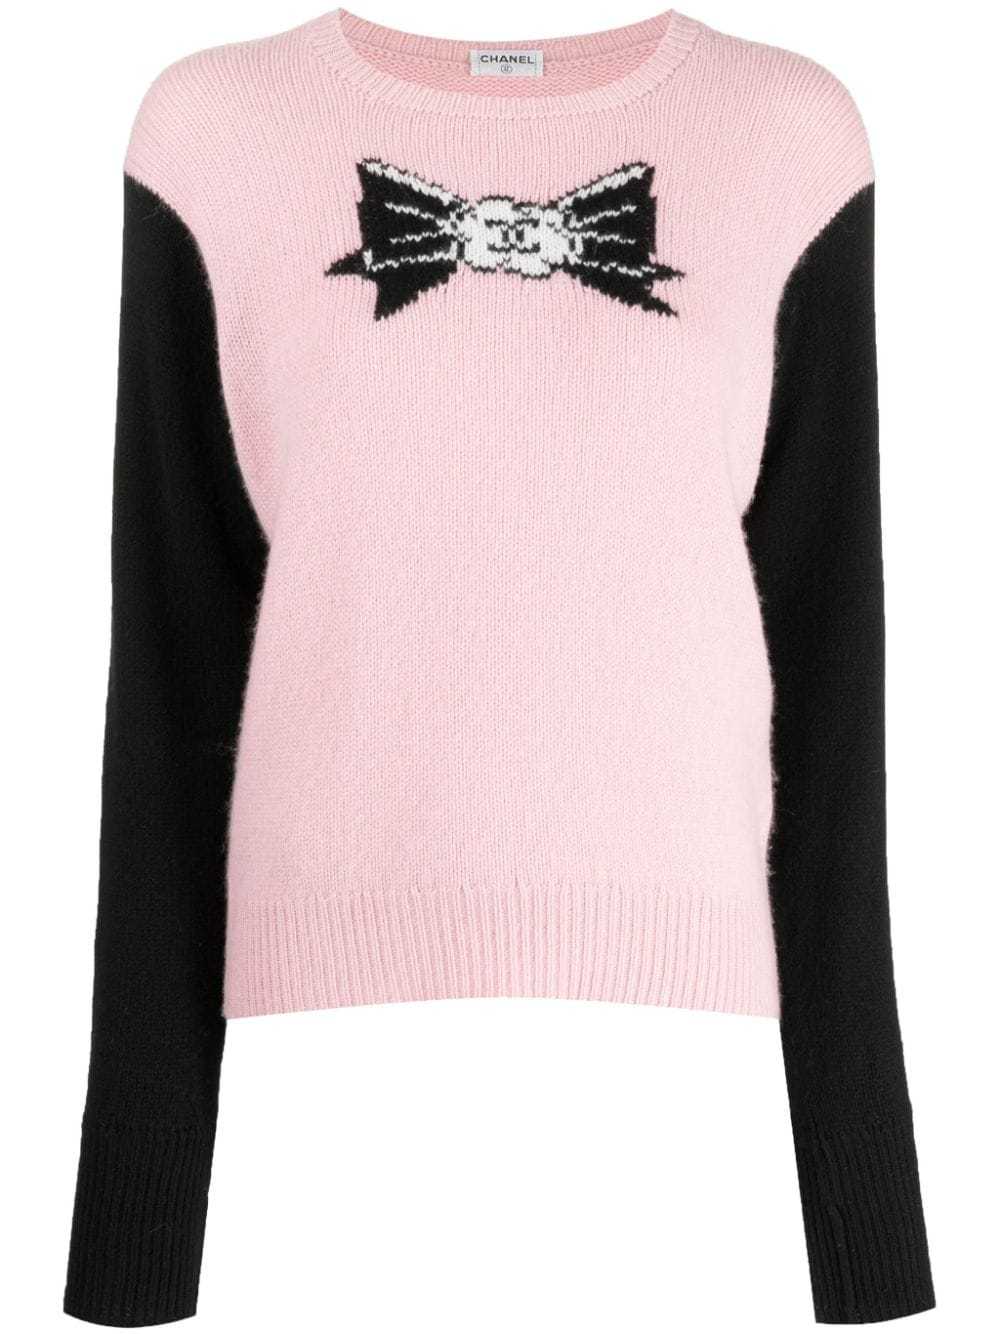 CHANEL Pre-Owned 1995 Coco Mark Cat knitted top -… - image 1